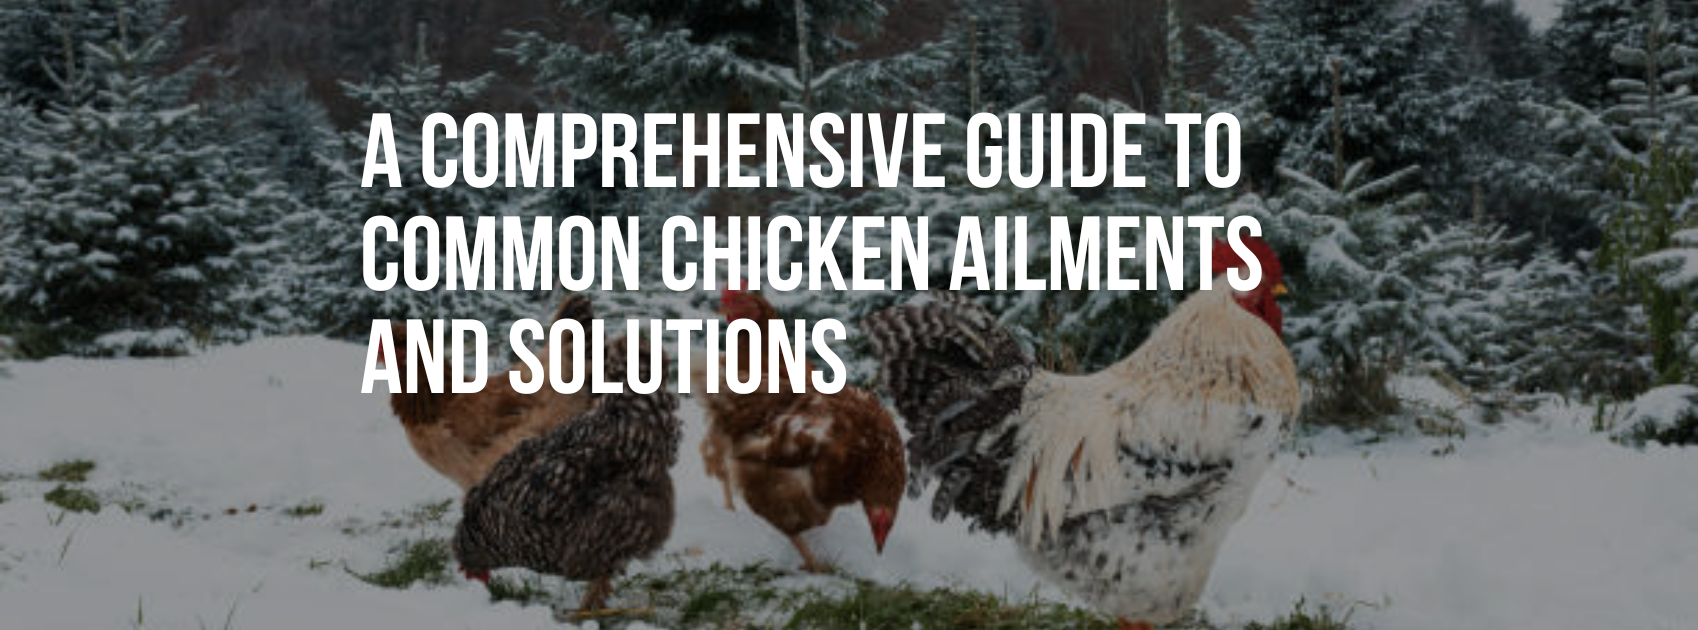 Navigating Winter Challenges: A Comprehensive Guide to Common Chicken Ailments and Solutions